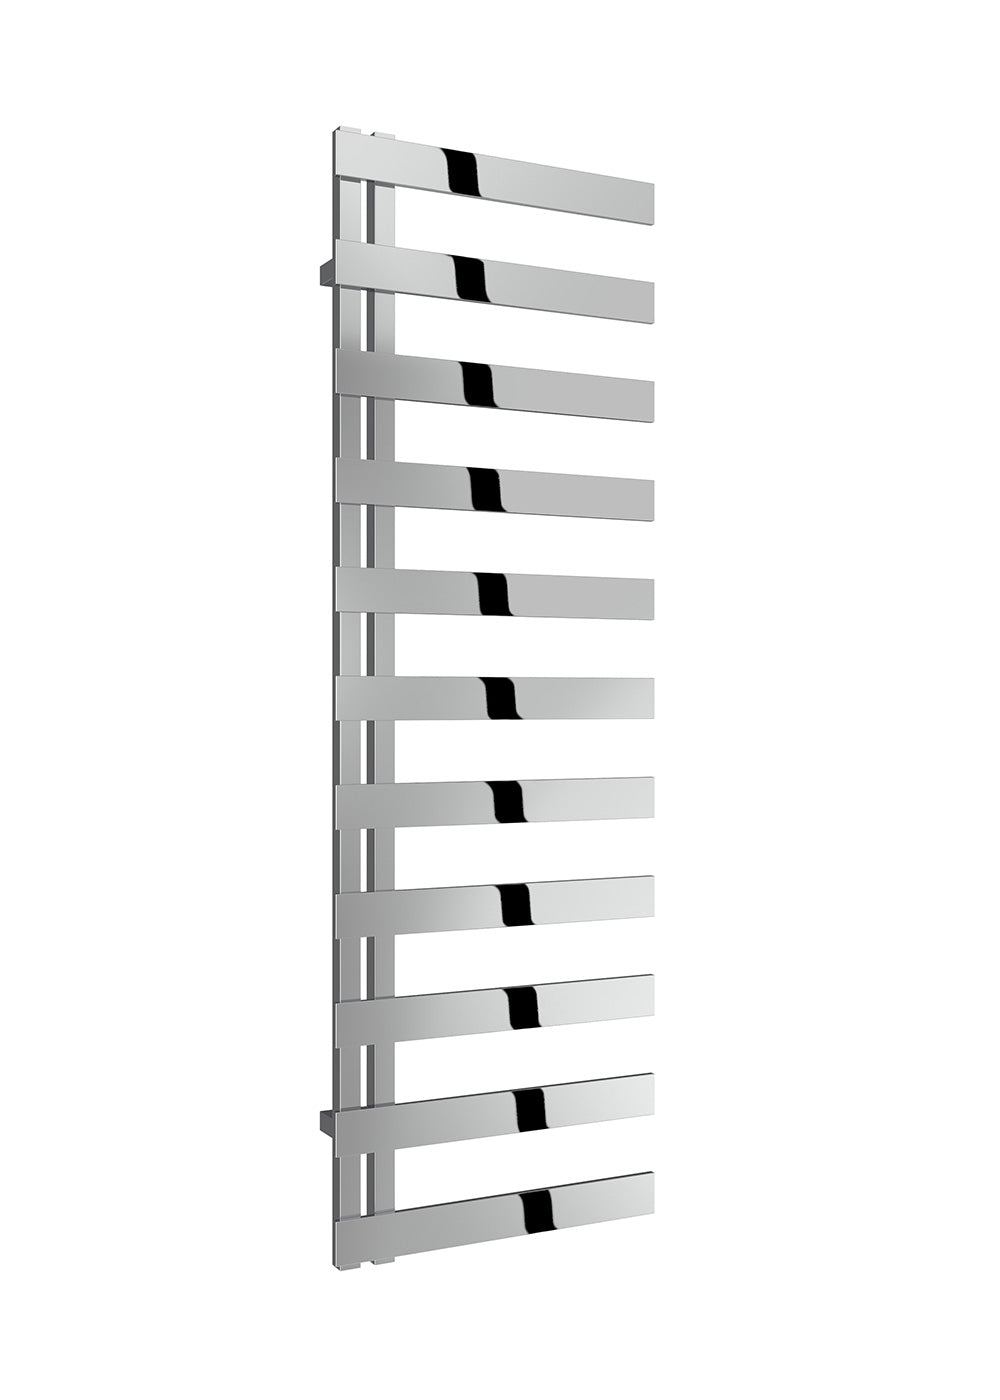 Capelli Stainless Steel Heated Towel Rail Radiator - Various Sizes - Polished Stainless Steel